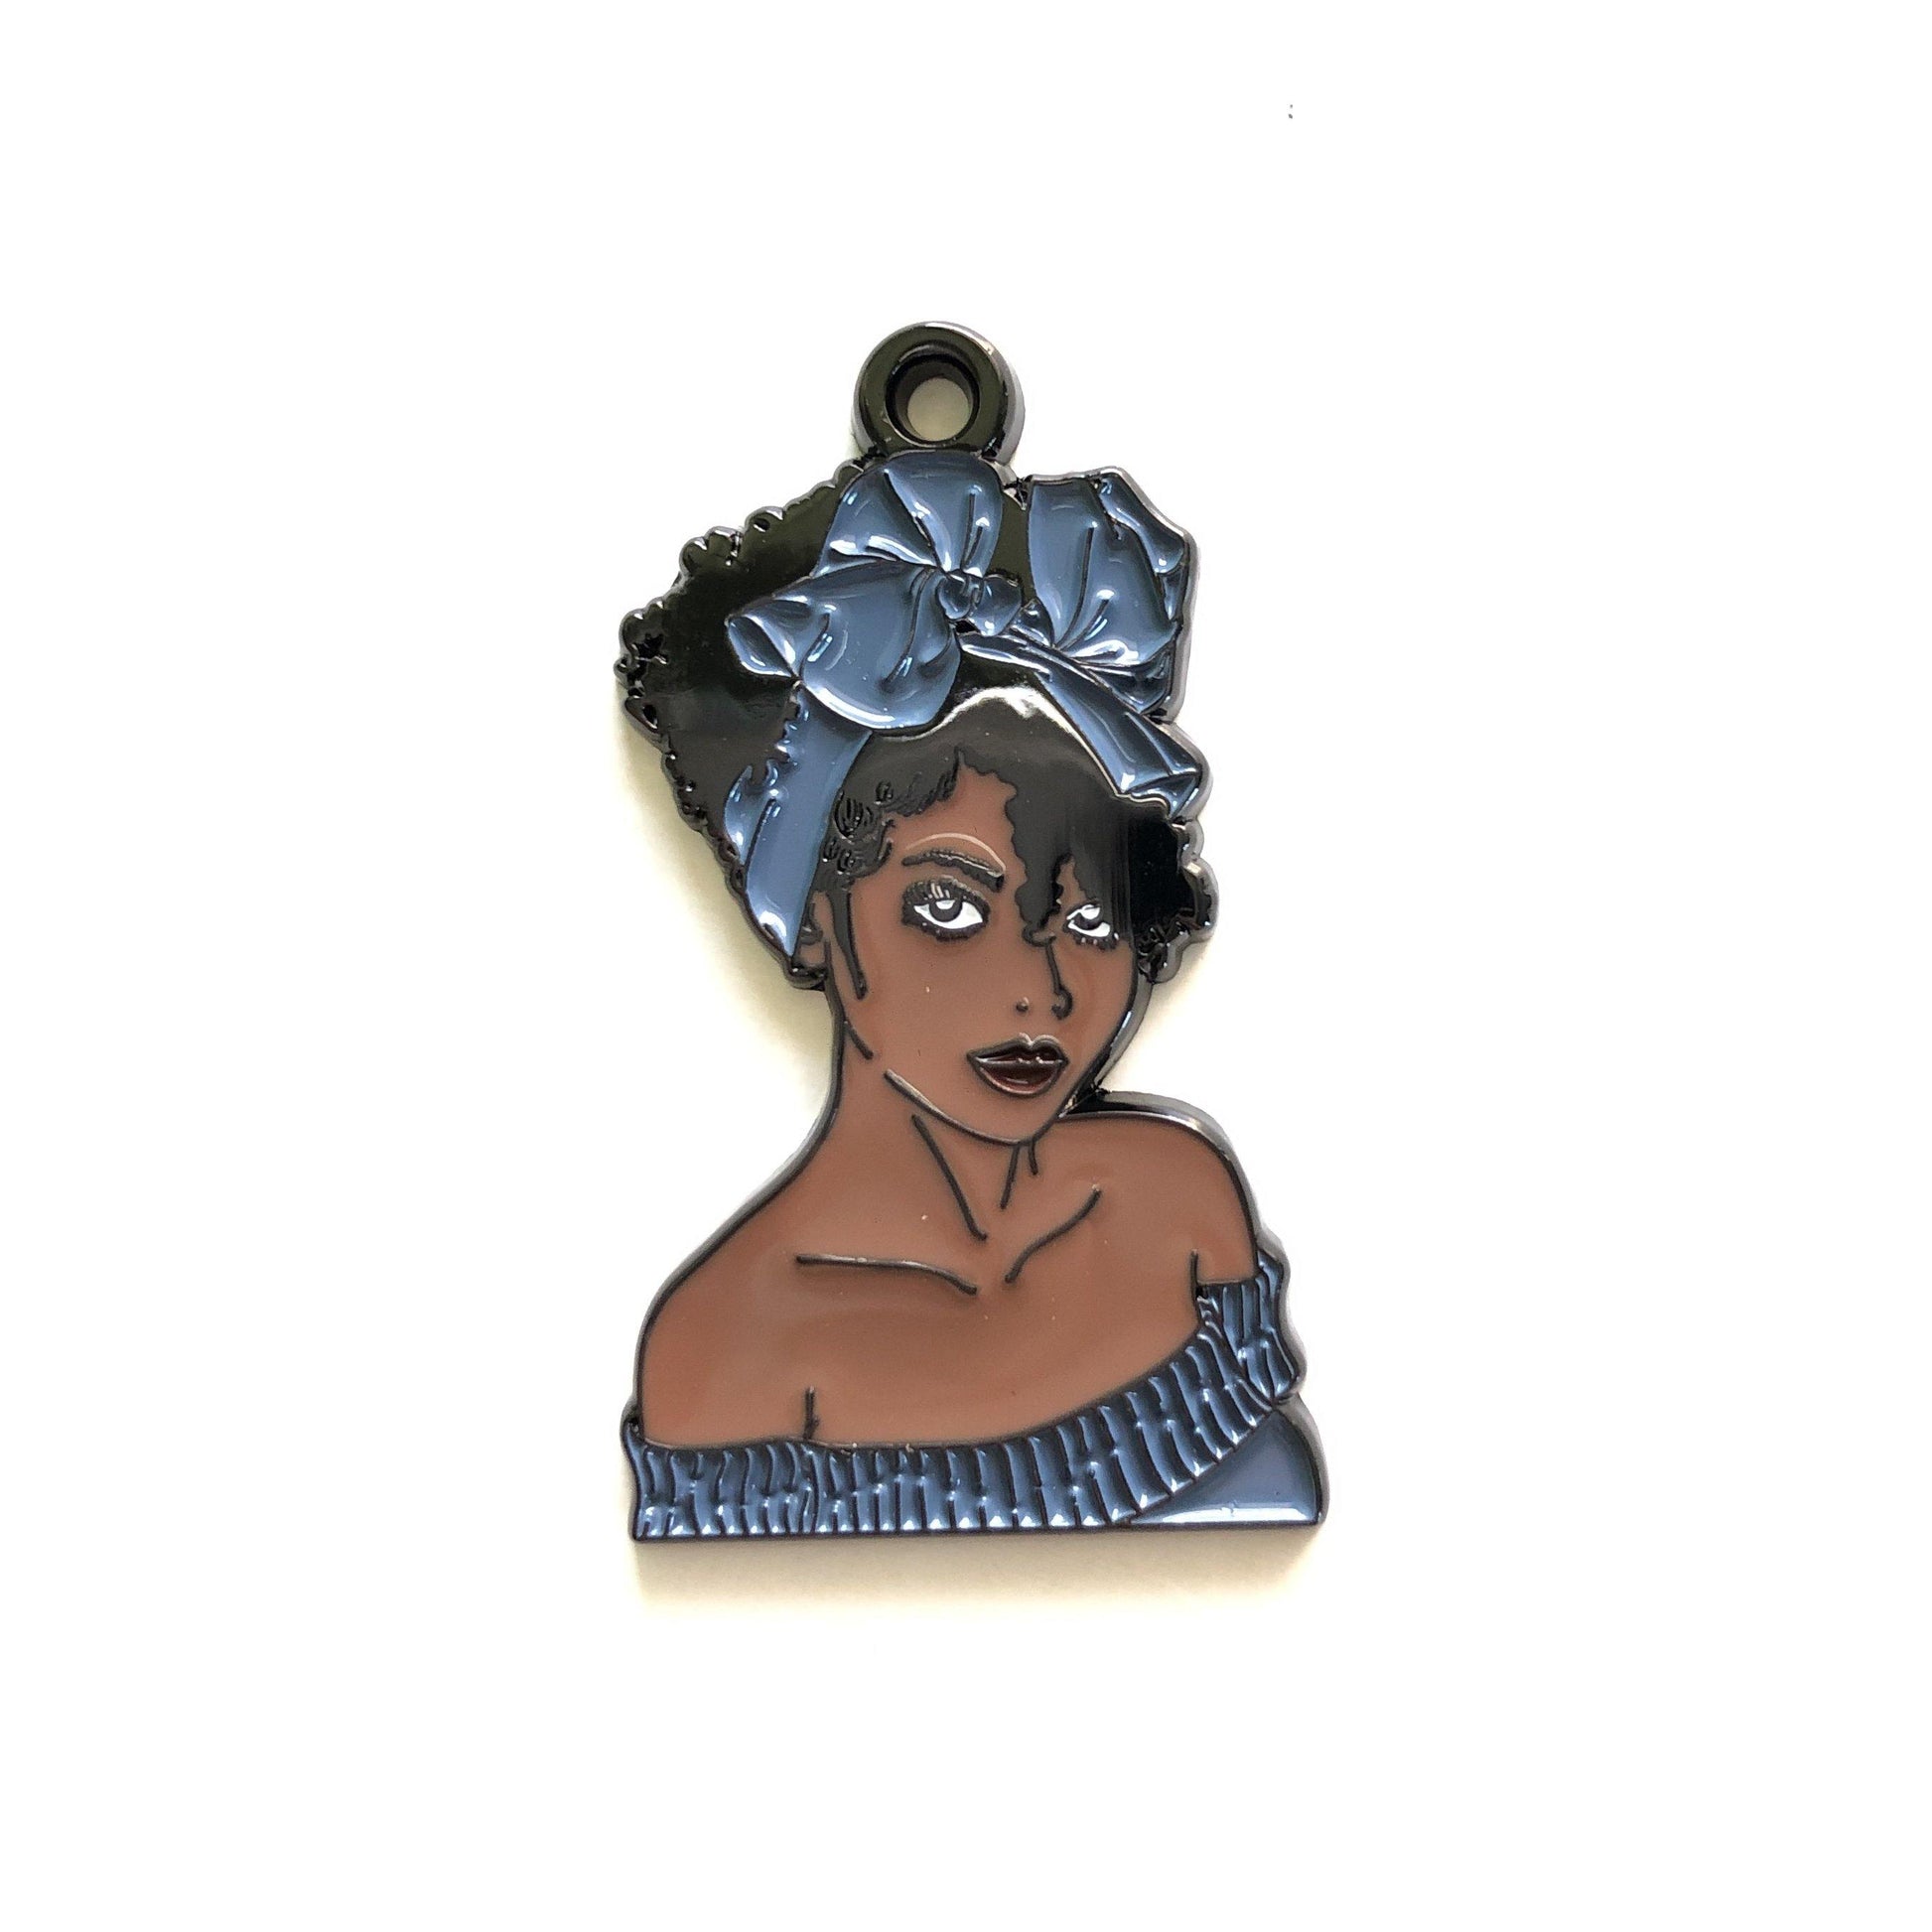 10pcs/lot Afro Black Girl Charms Blue Enamel Afro Charms On Sale Charms Beads Beyond